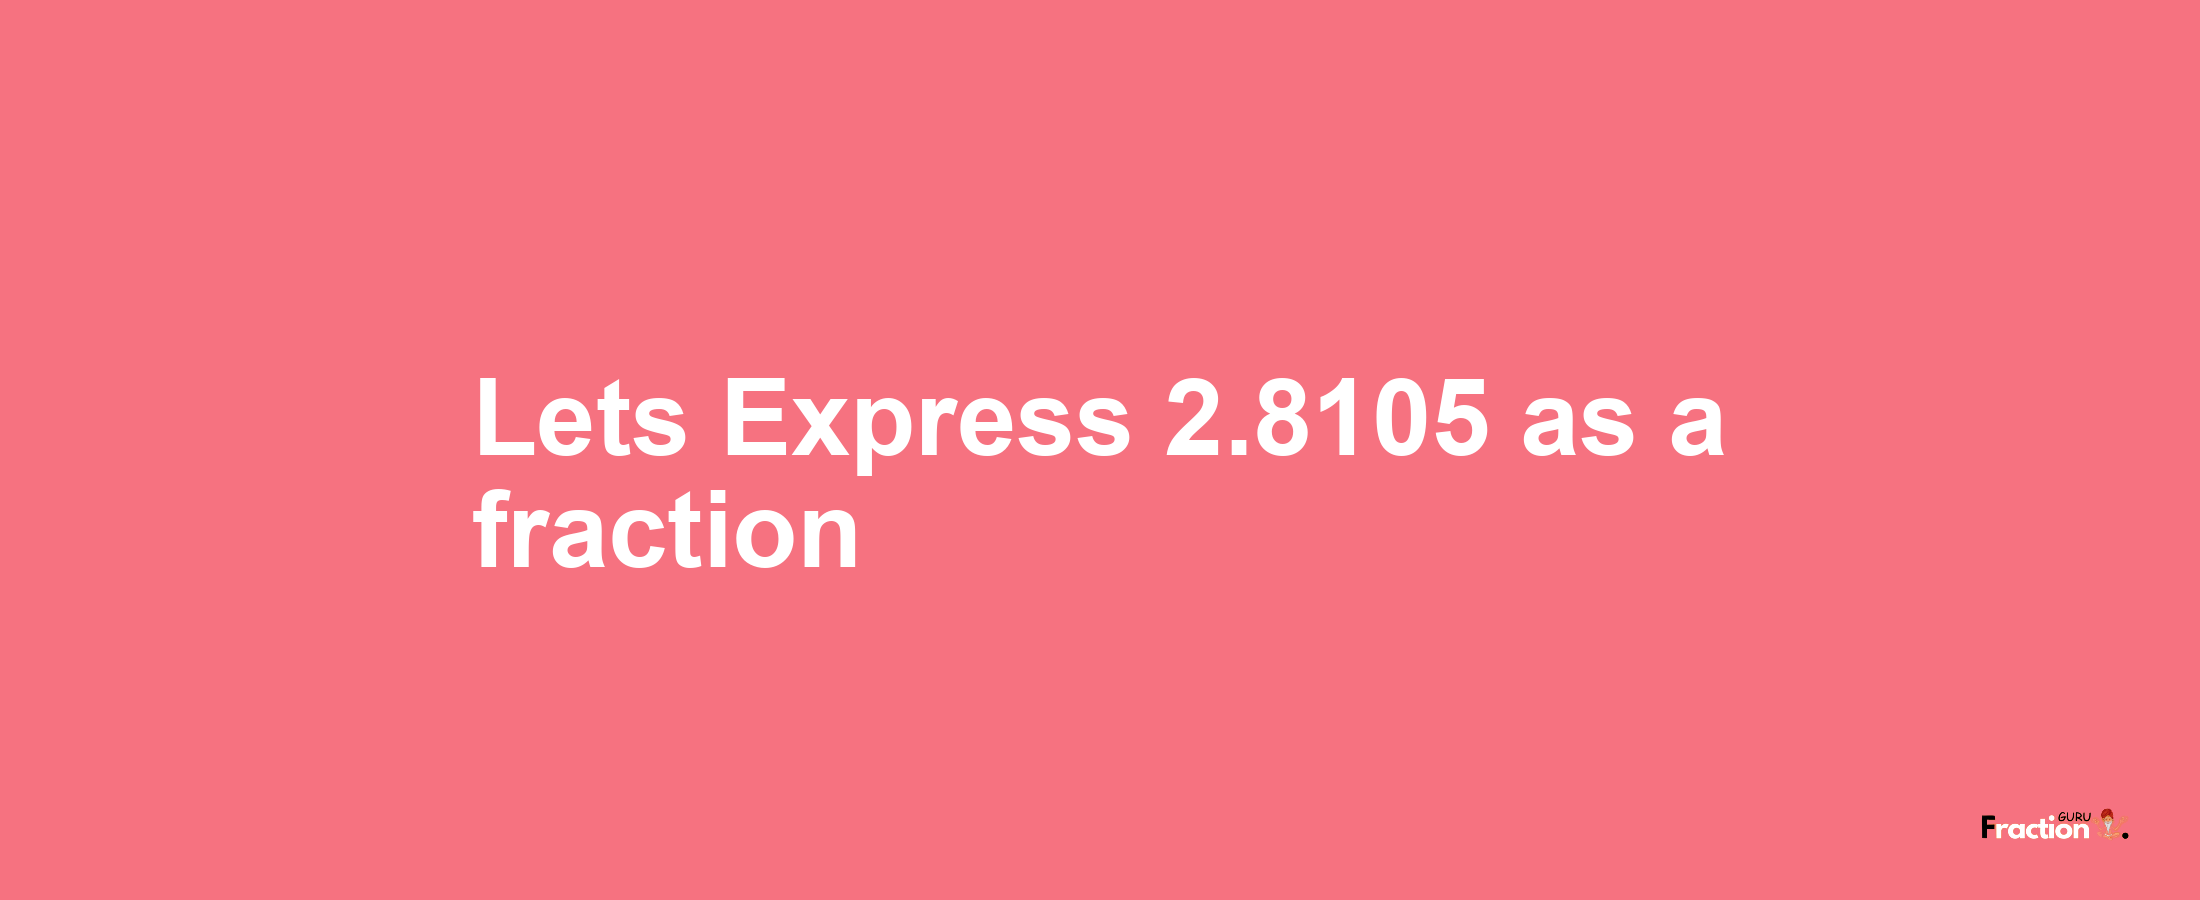 Lets Express 2.8105 as afraction